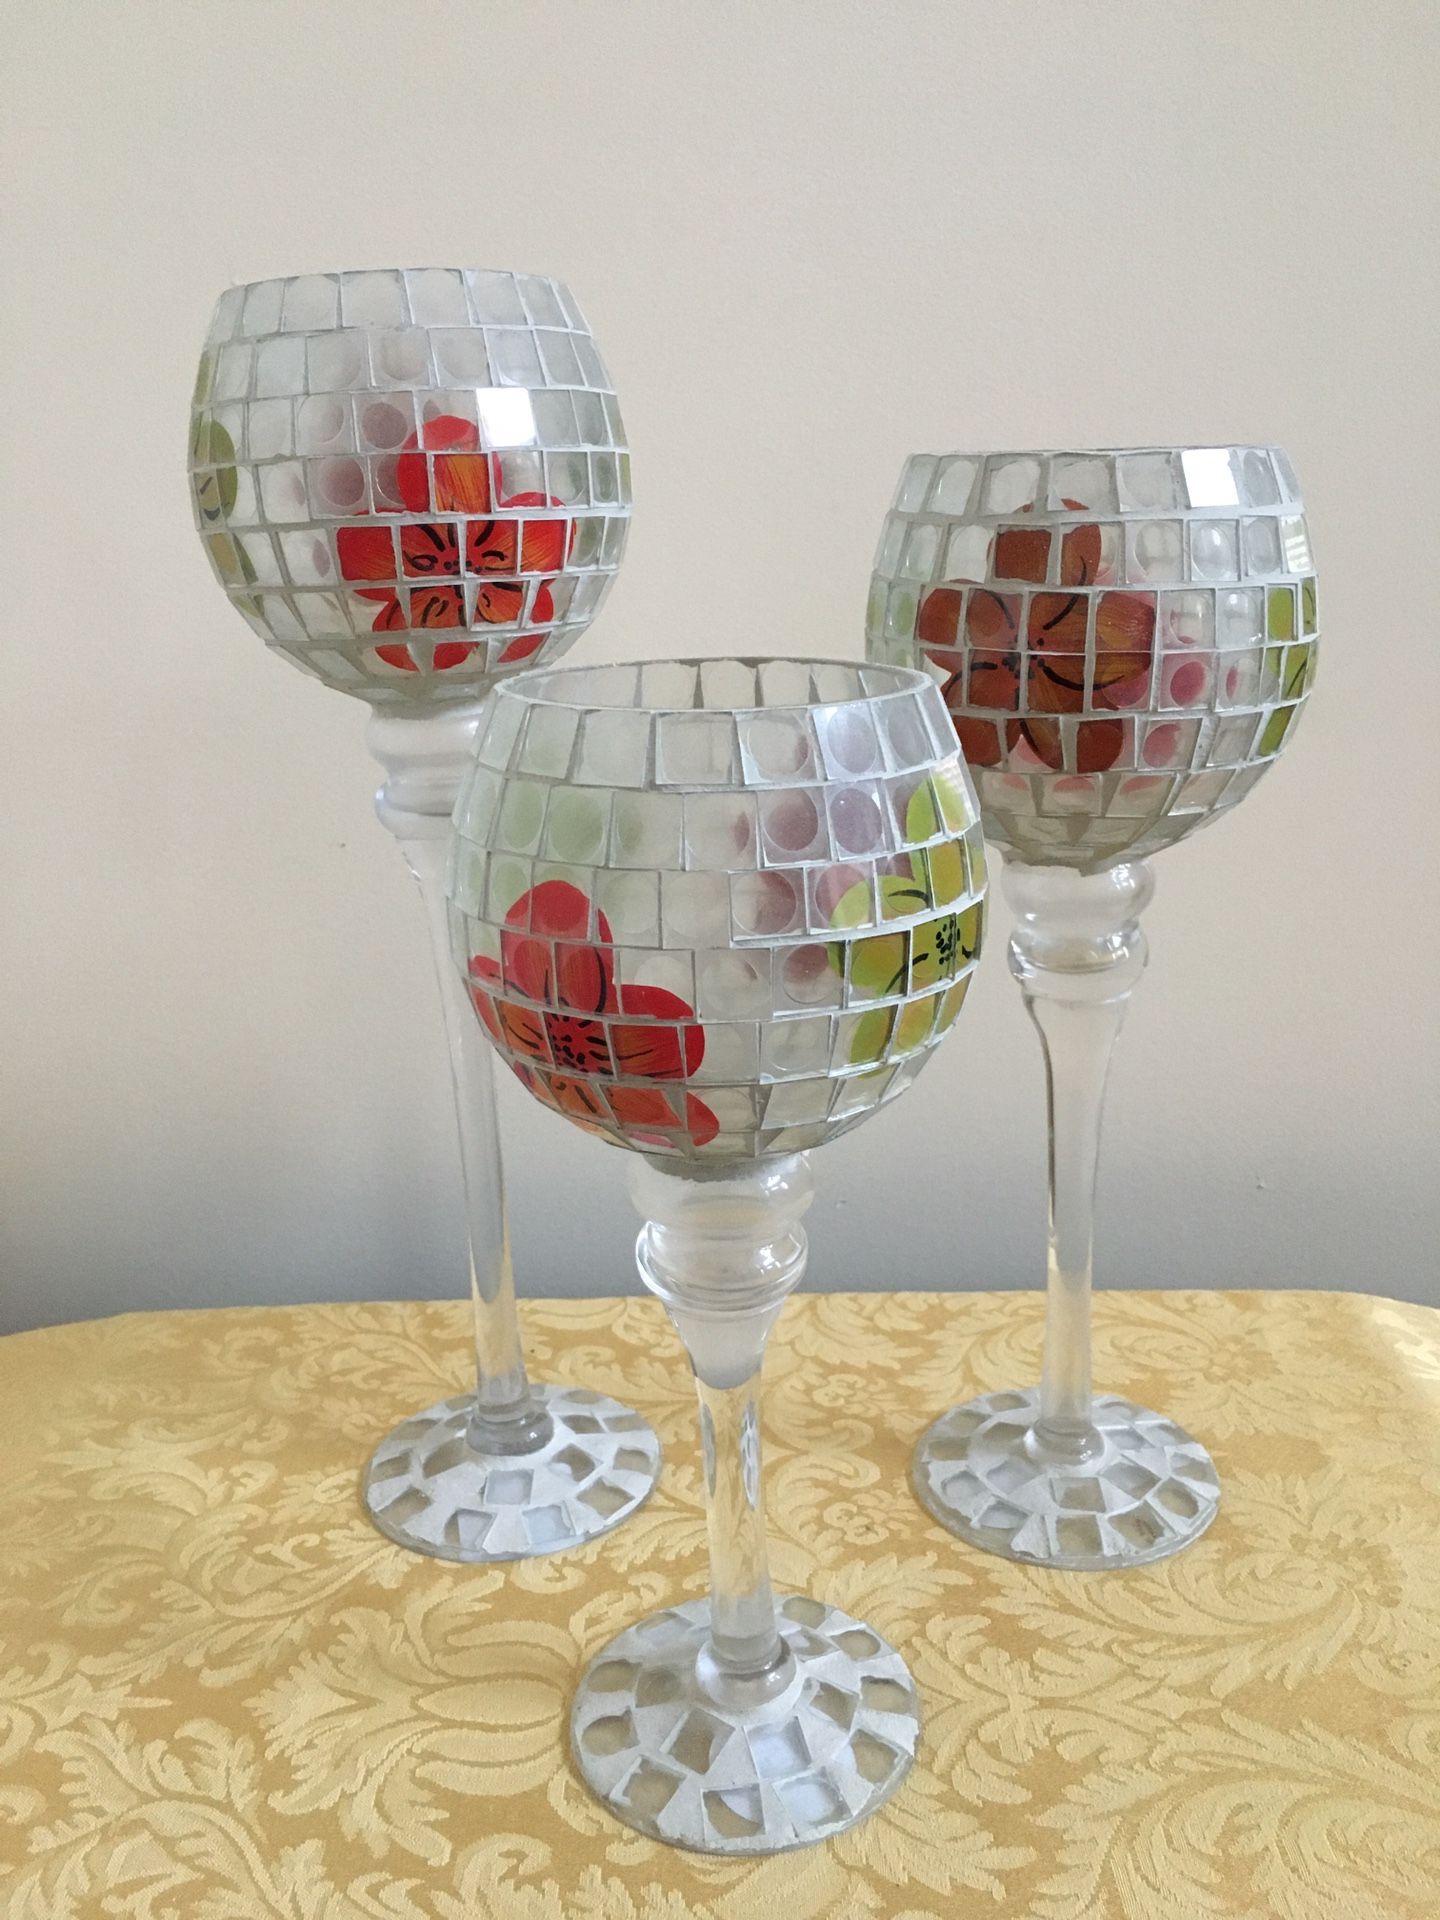 Mosaic Floral Candle Holders - 3 Piece Set